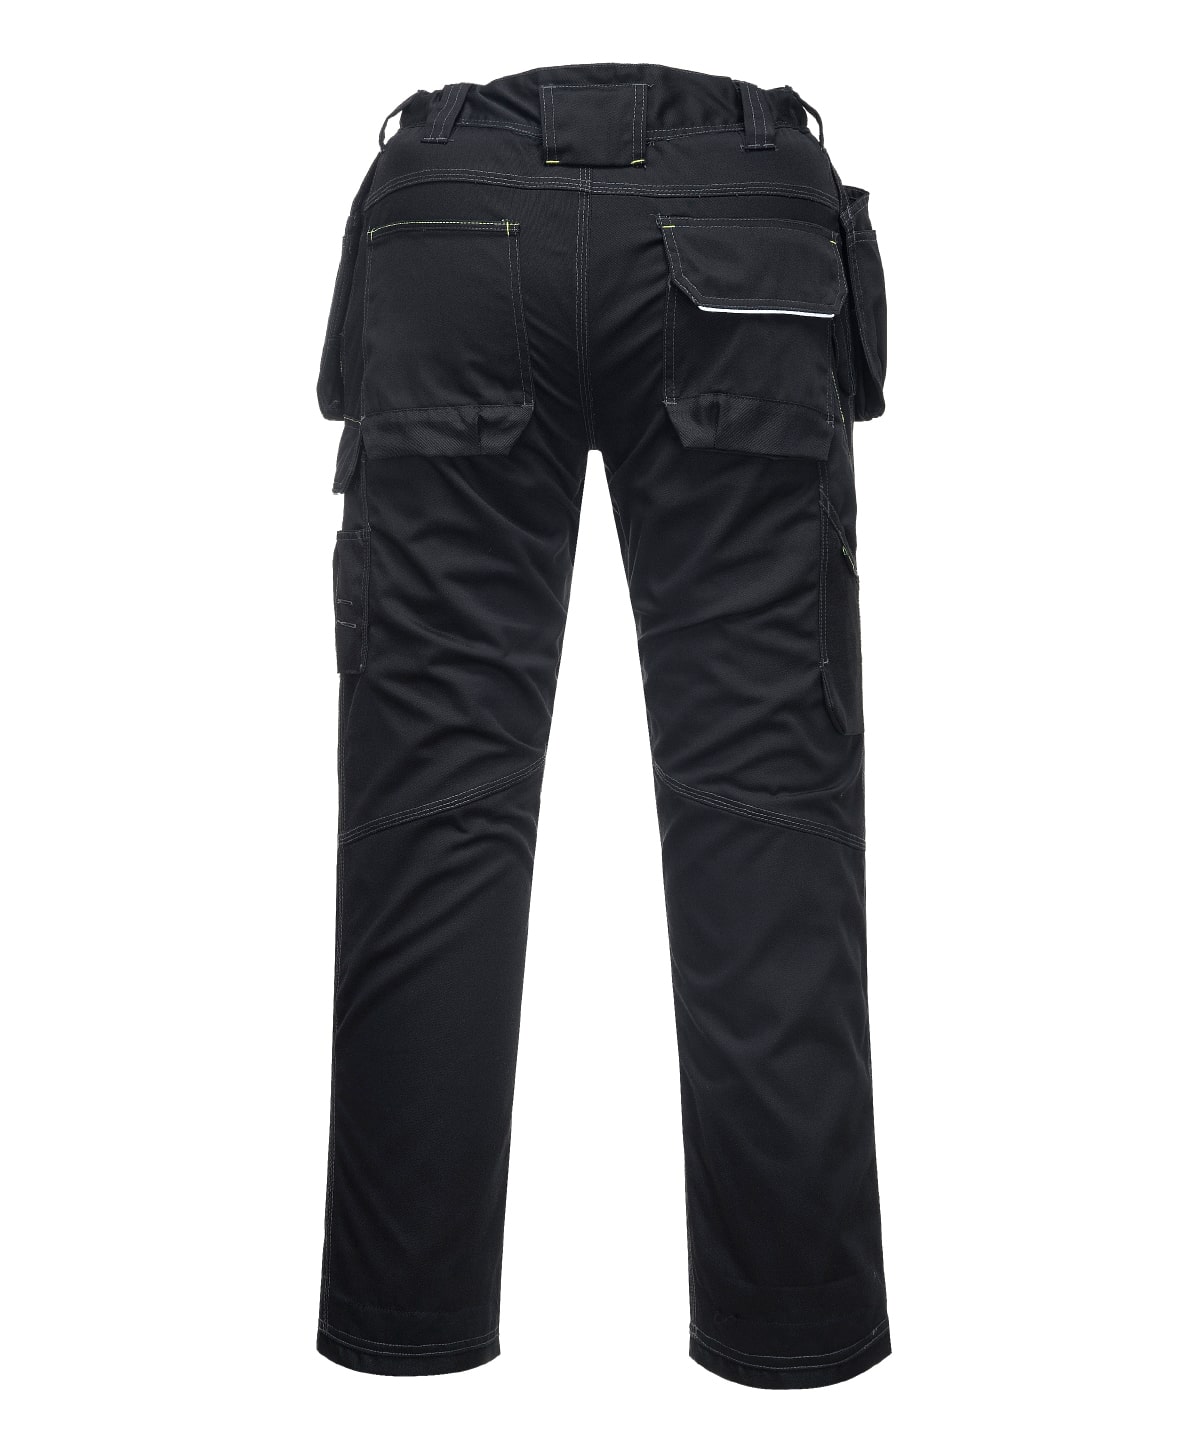 Portwest PW3 Padded Trousers